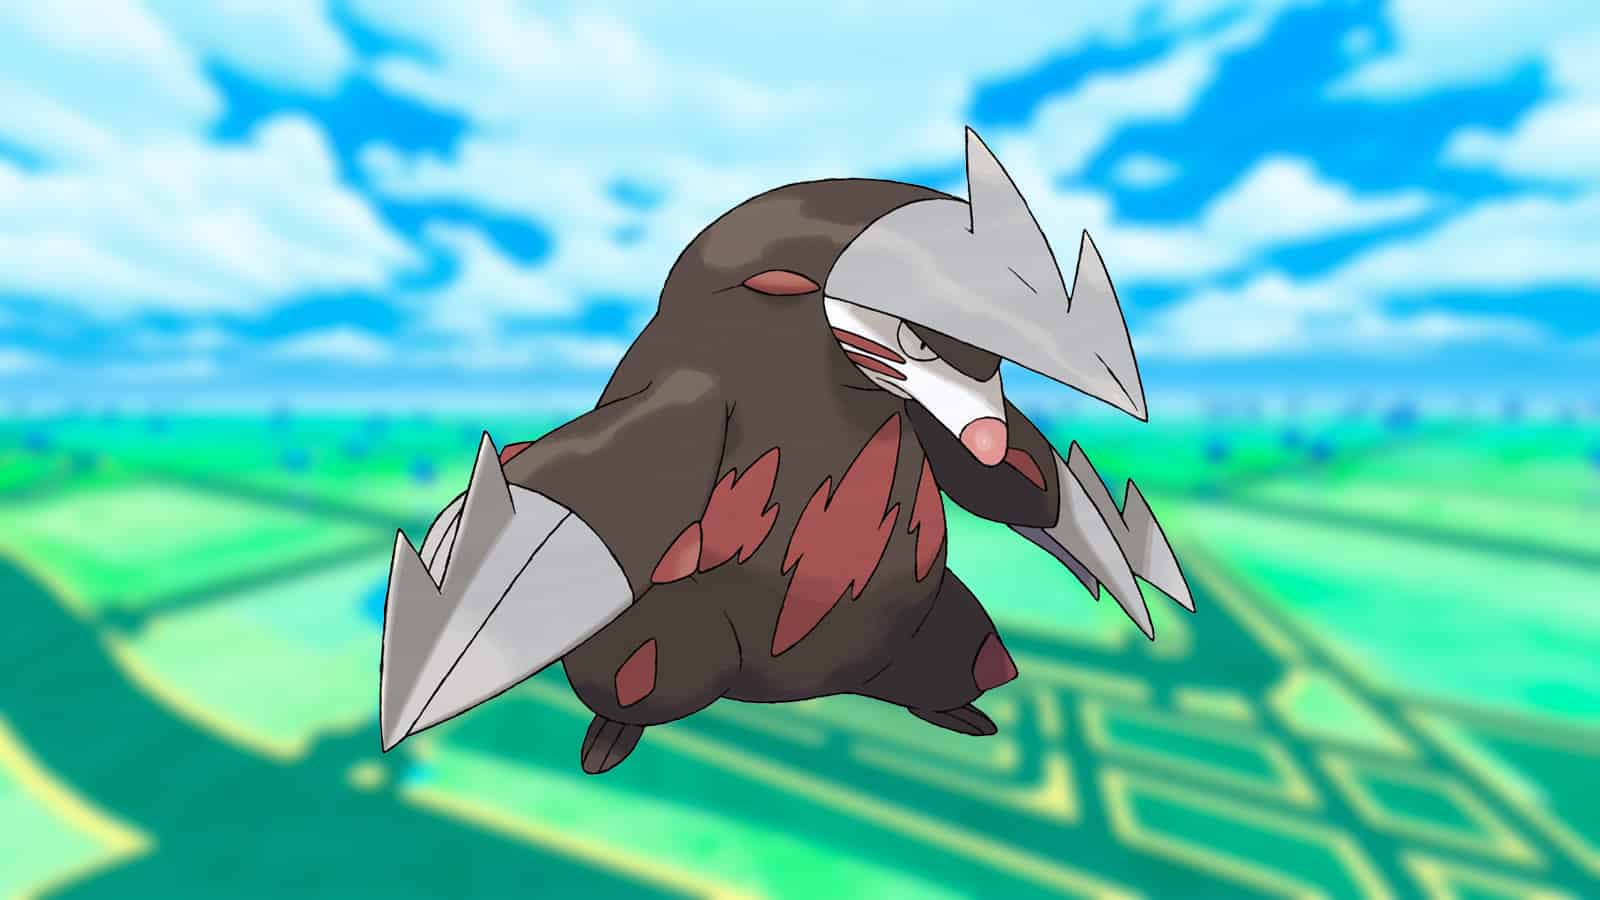 Excadrill appearing in Pokemon Go